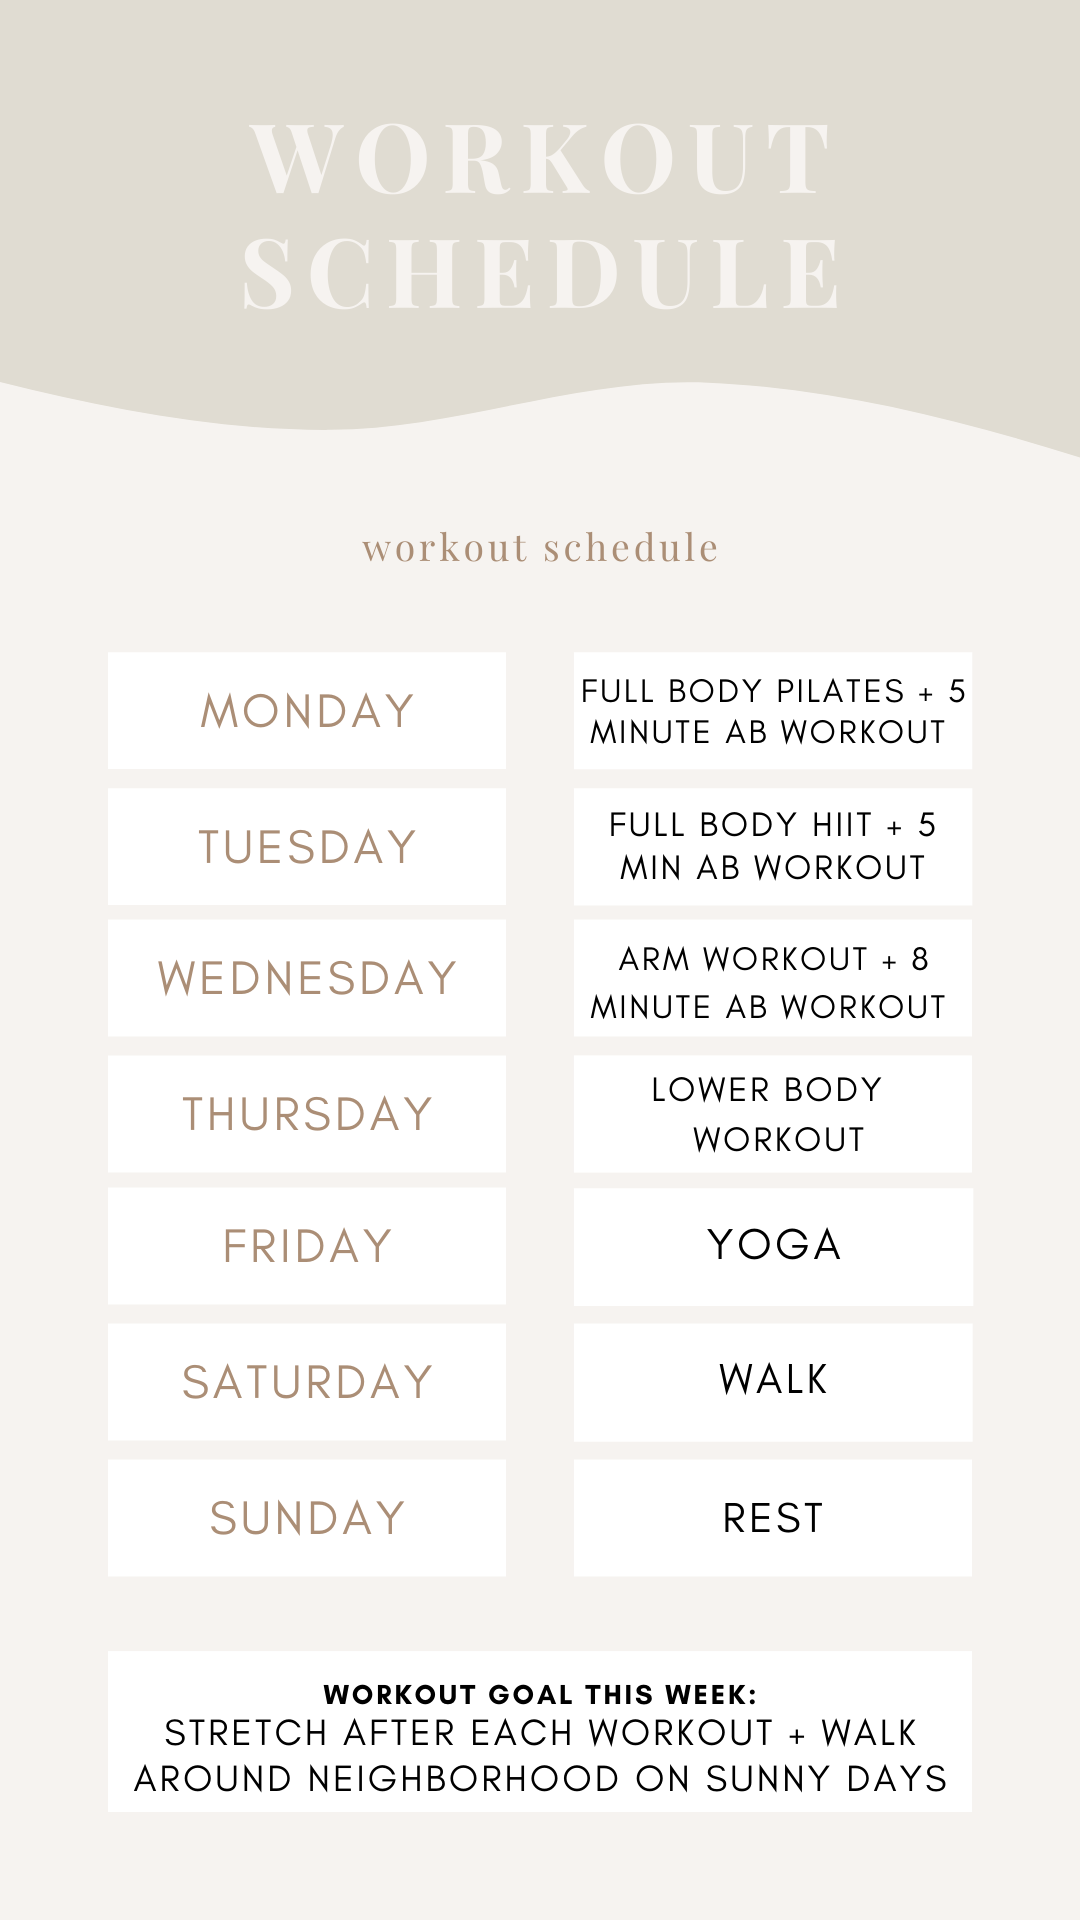 Week Workout Schedule - Workout Planning | Louella Reese